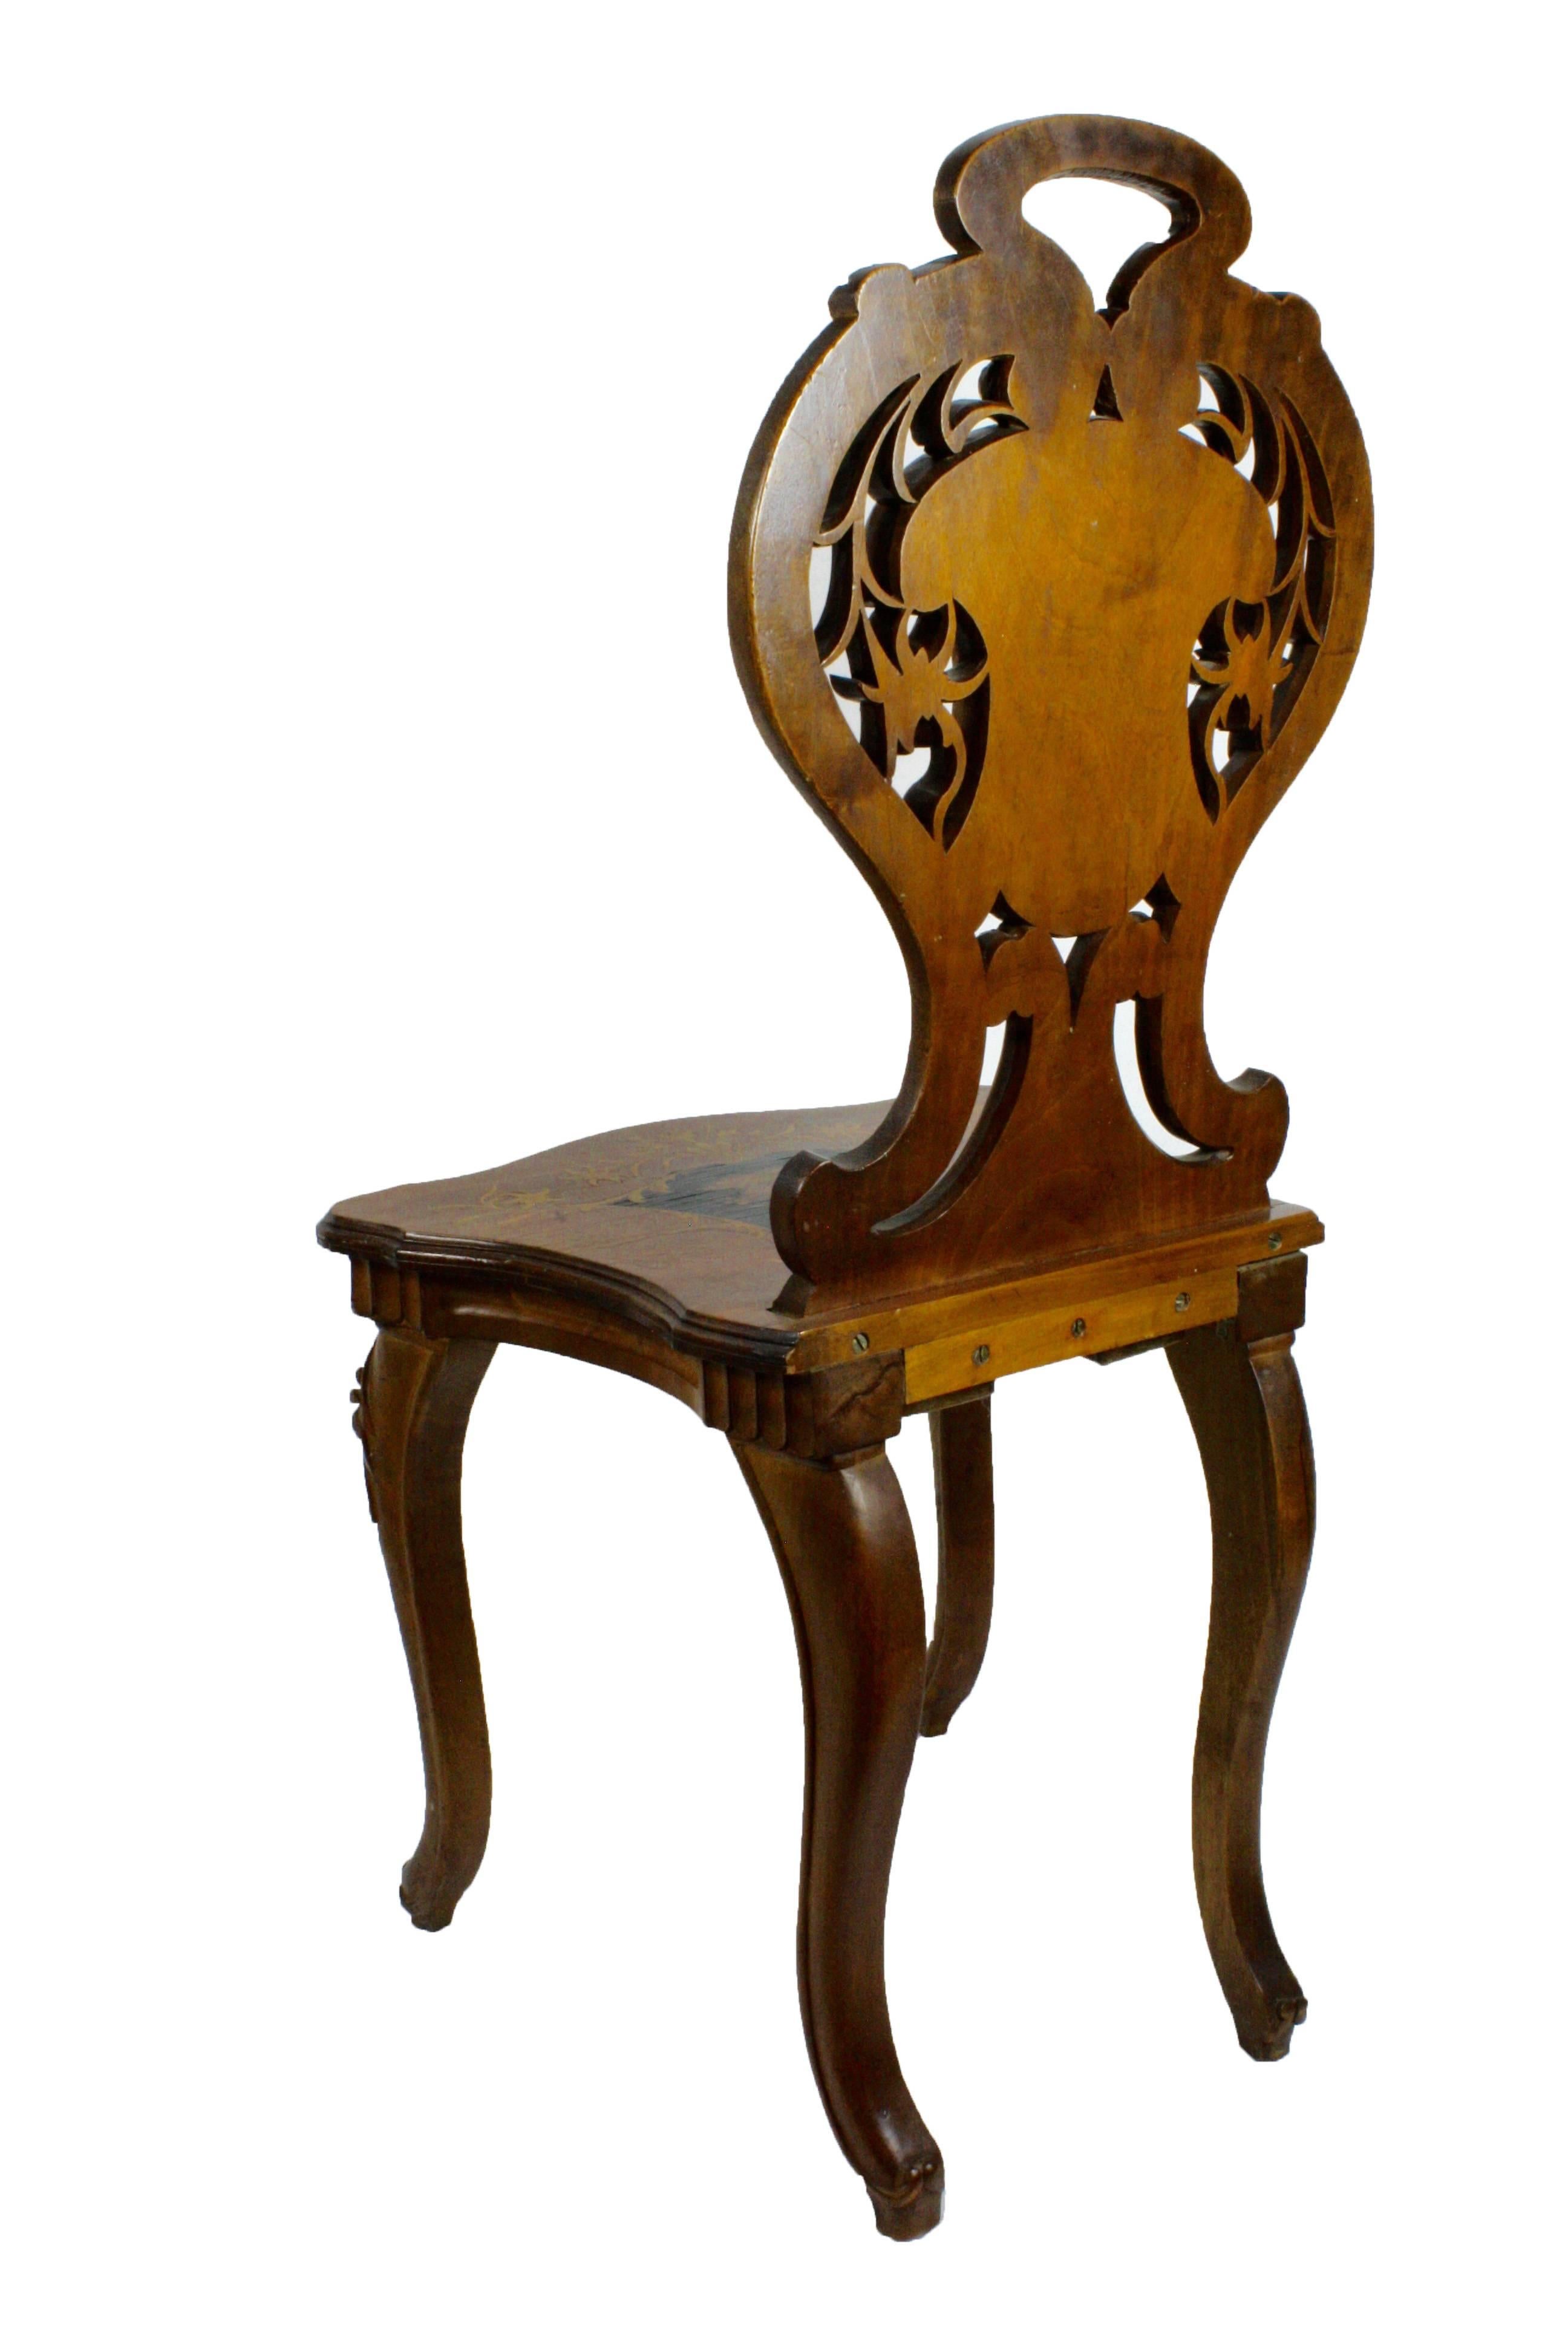 Carved Brienz Walnut Chair with Inlaid Seat and Back, circa 1900 